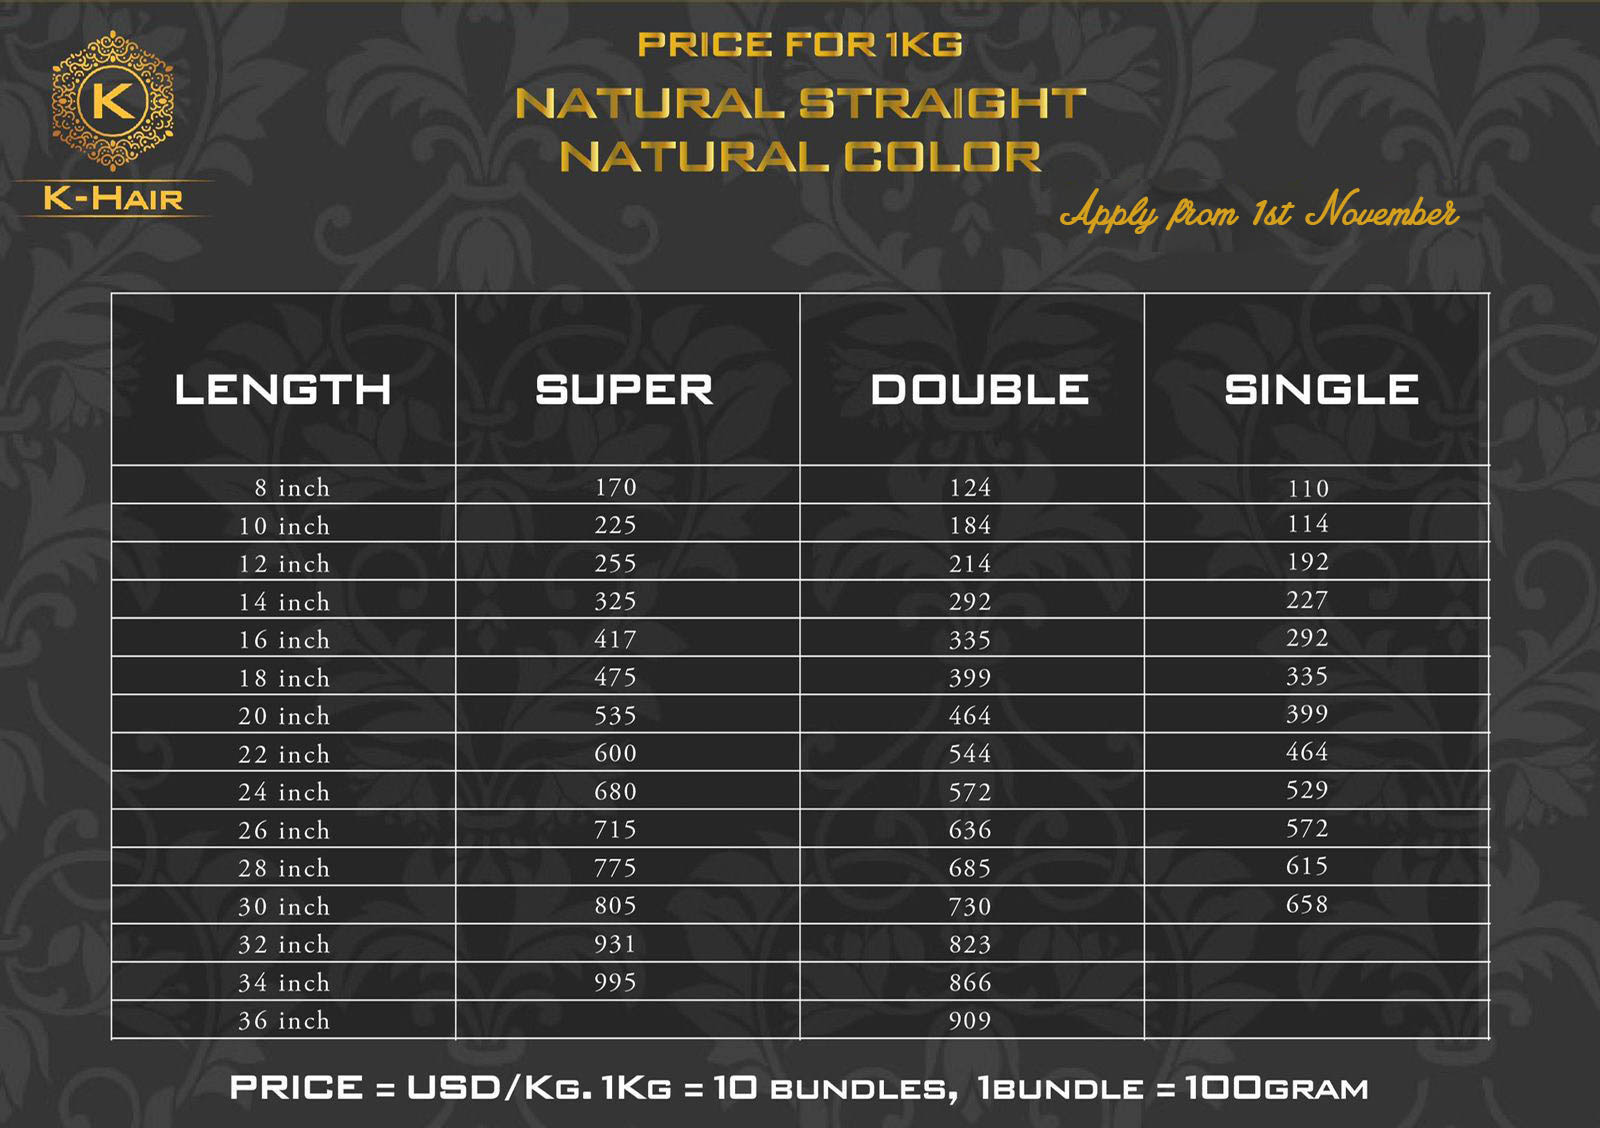 Natural straight natural color wholesale hair extension price list